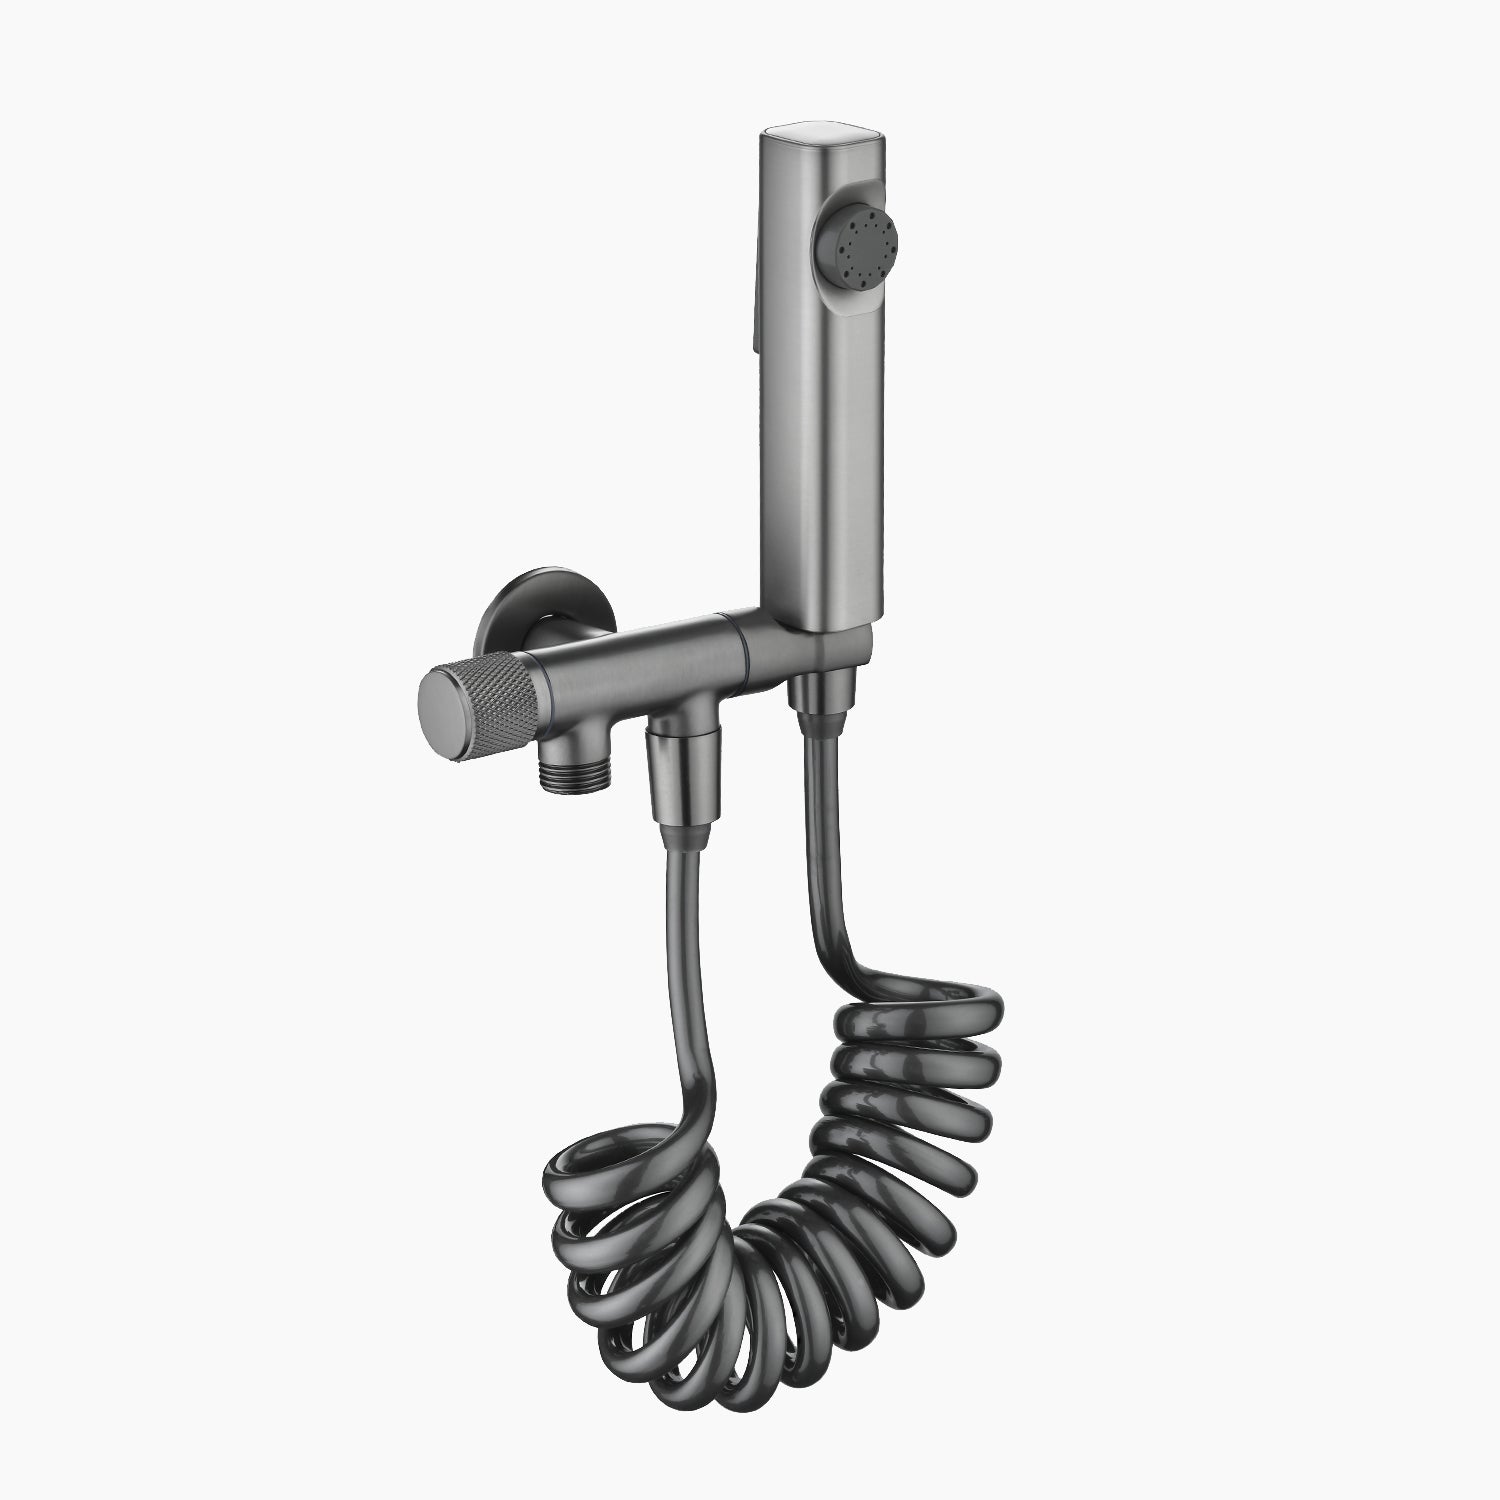 Lefton Toilet Spray Faucet with Angle Valve-BFS2203